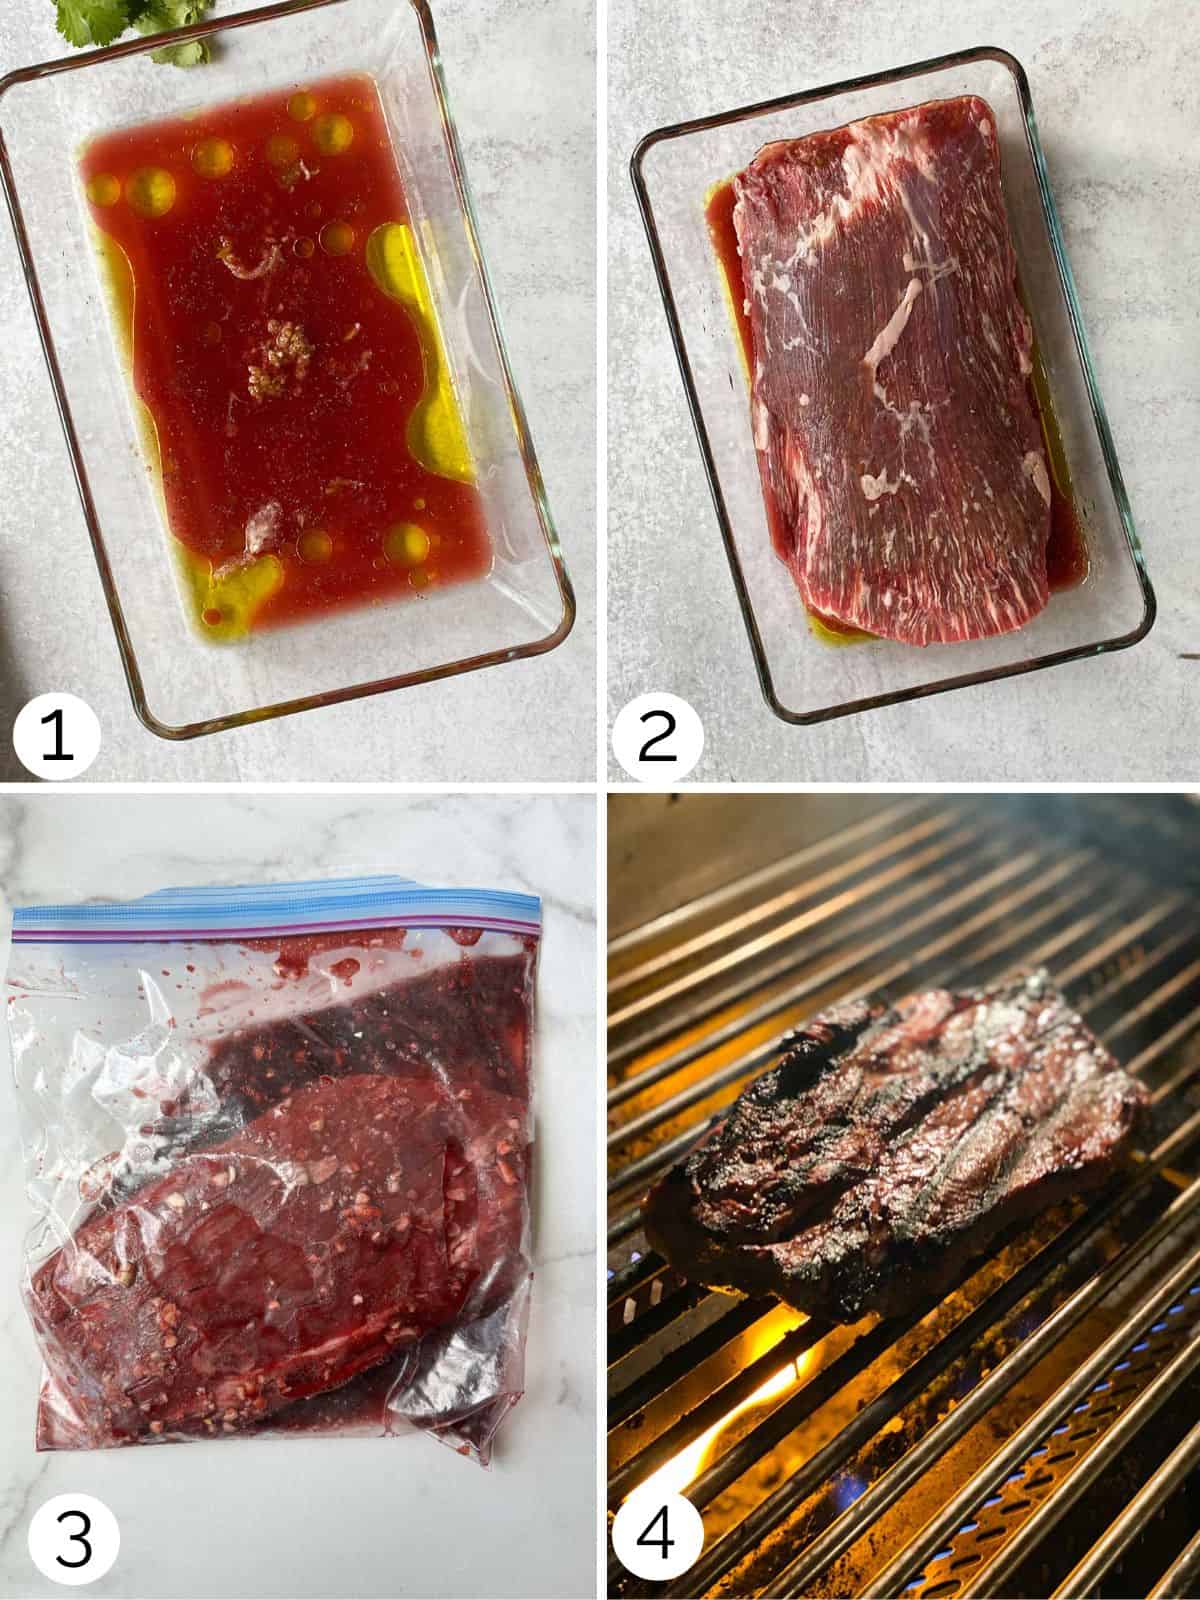 The process of making the steak marinade, ways to marinade the steak, and grilling the steak in a collage.